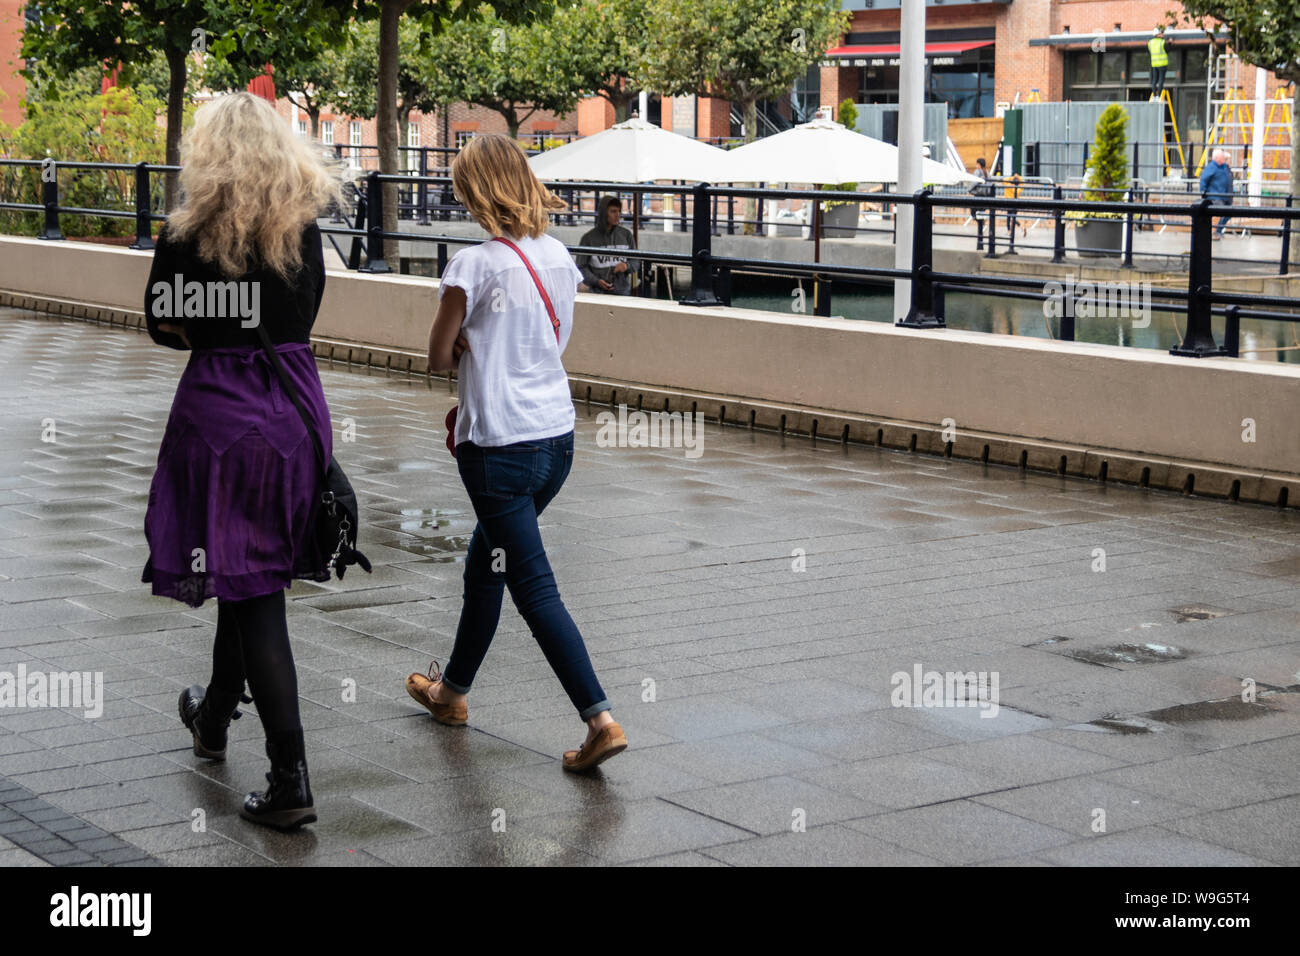 Two women walking together in the rain without umbrellas Stock Photo